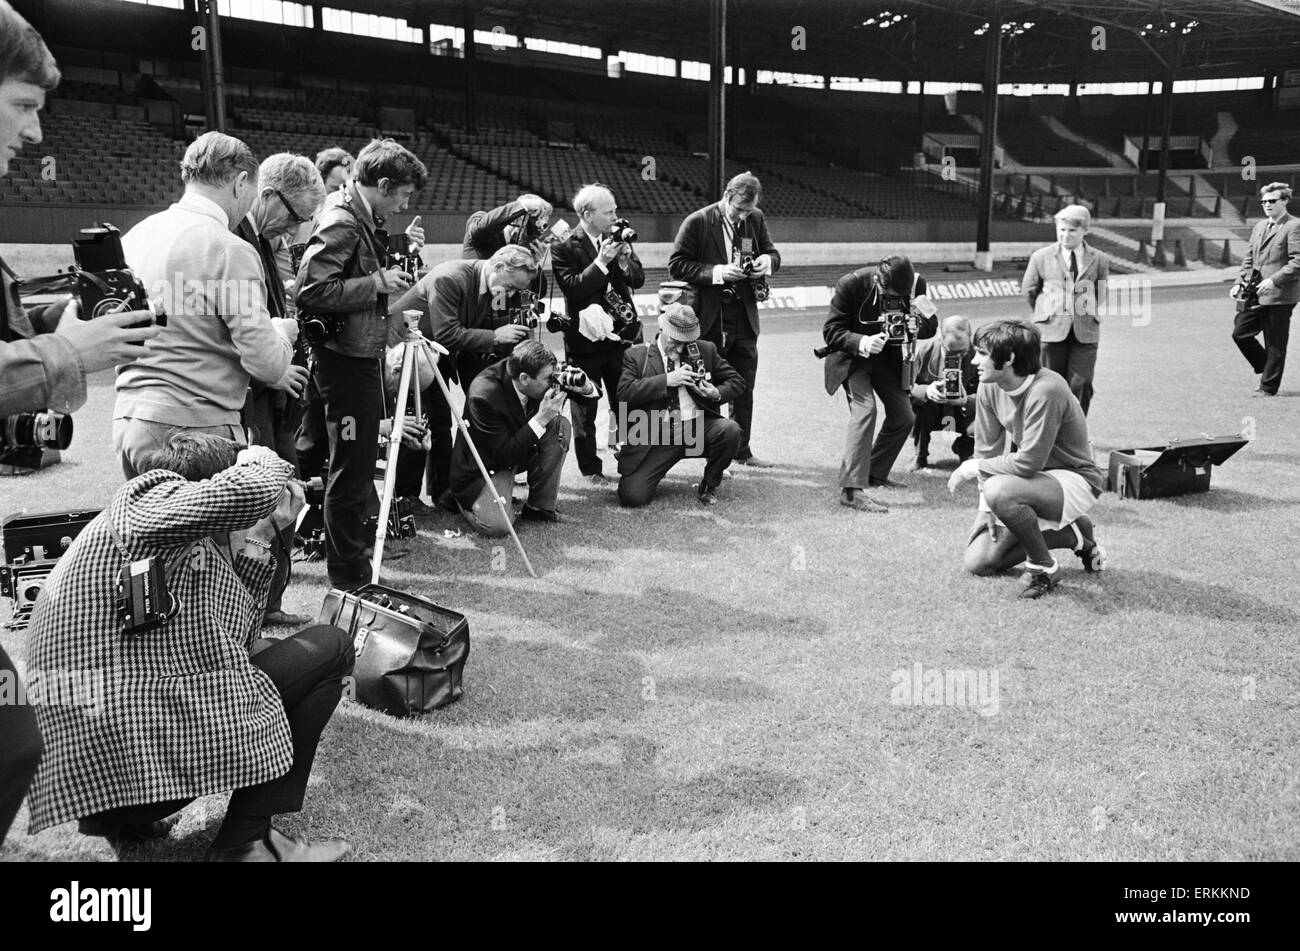 Photocall at Old Trafford for the victorious Manchester United team who defeated Benfica in the European cup Final at Wembley in May. Photographers surround George Best. 29th July 1968. Stock Photo